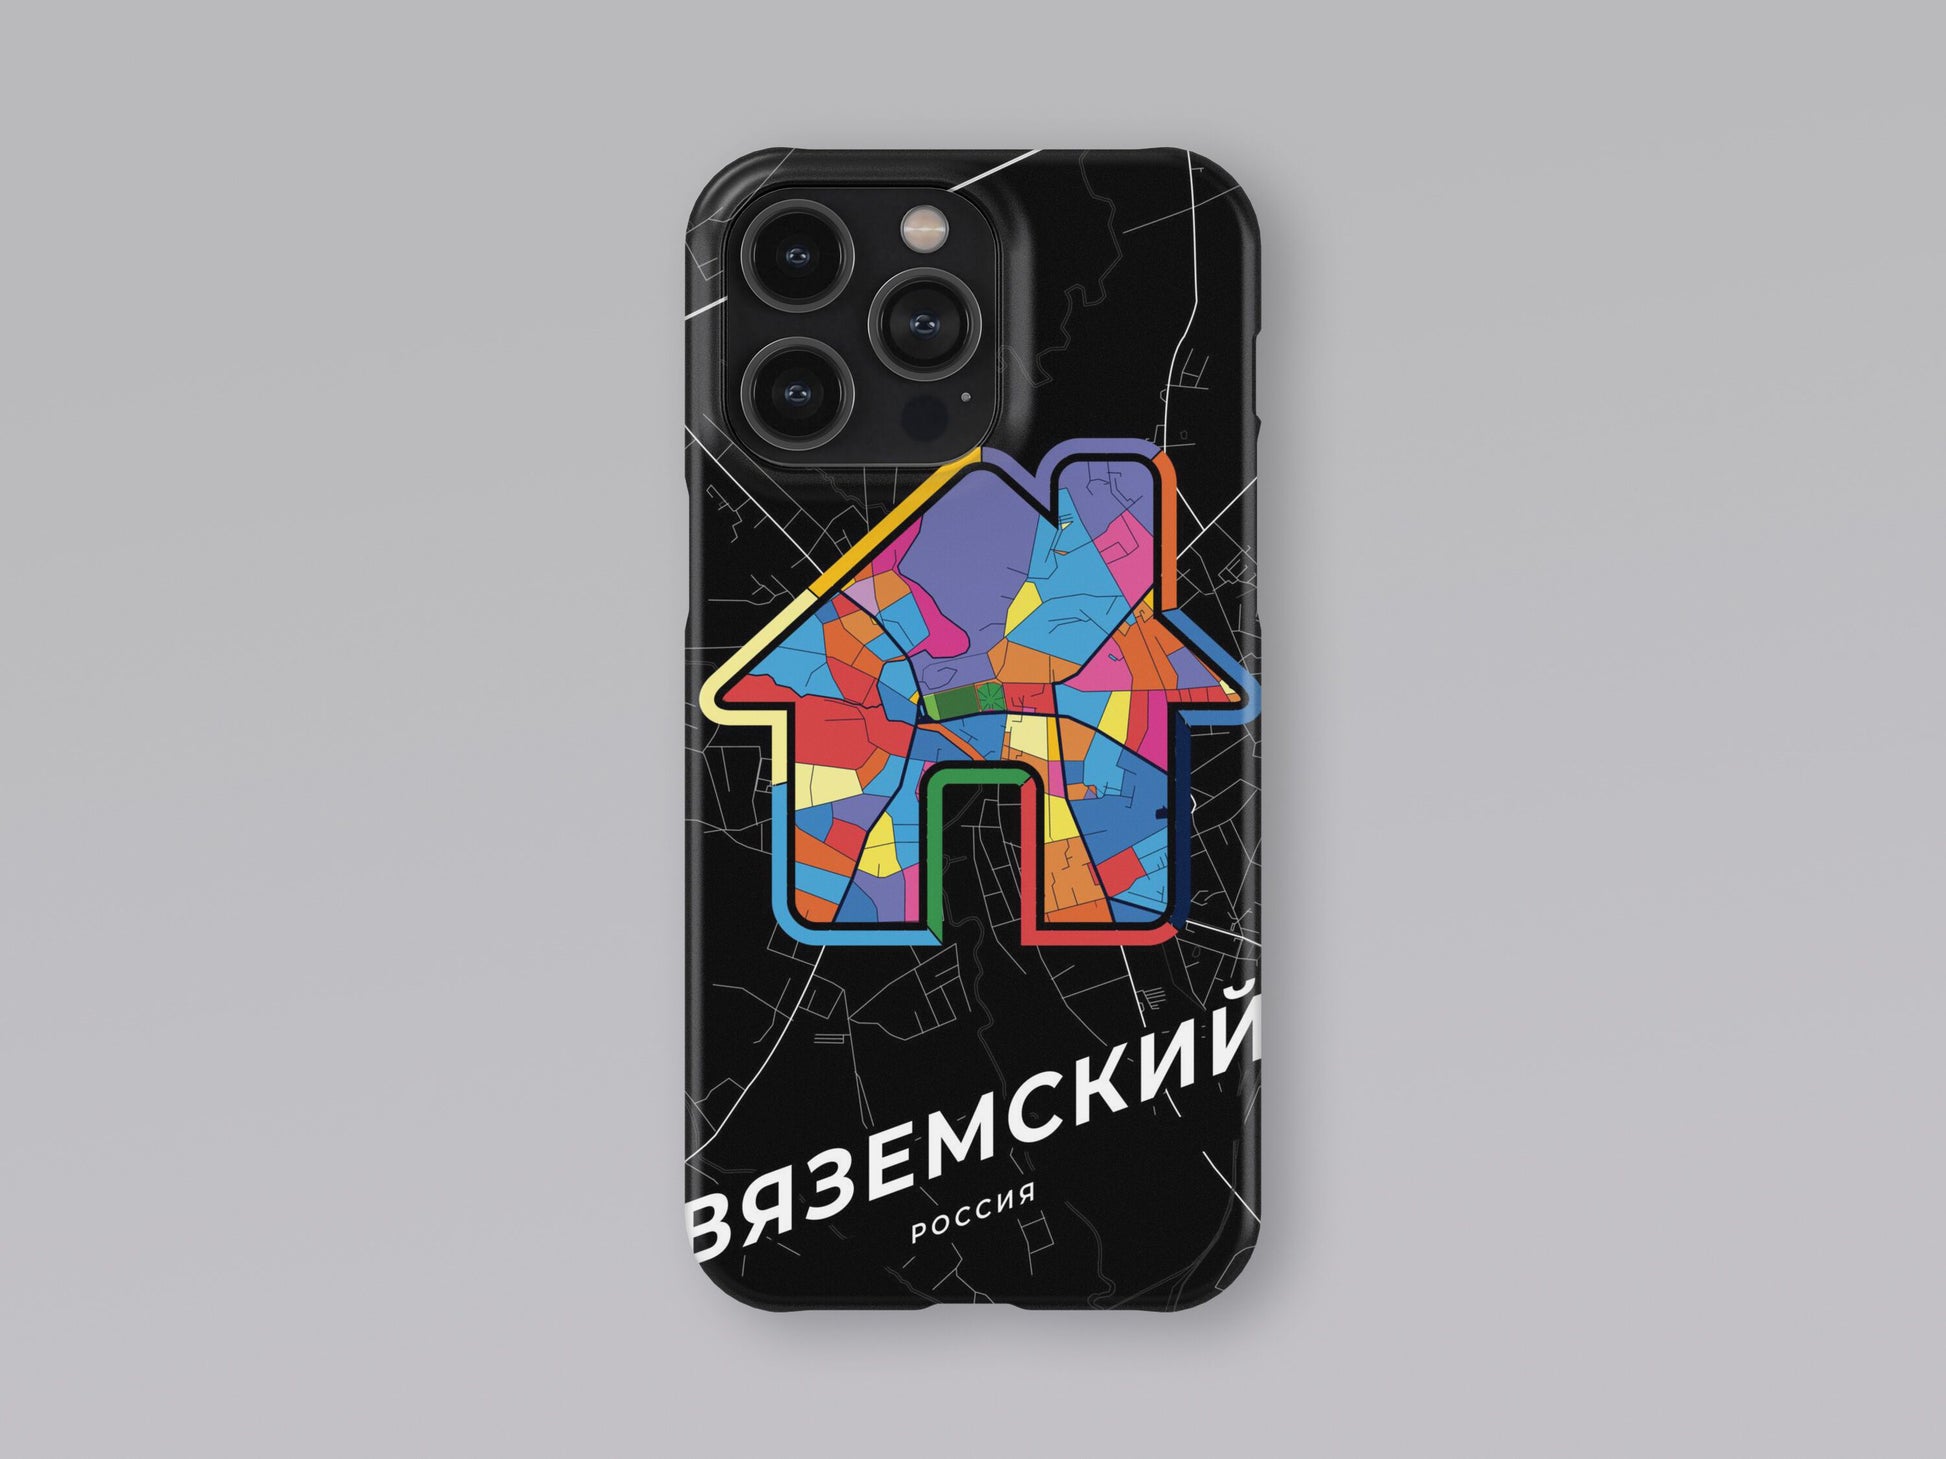 Vyazma Russia slim phone case with colorful icon 3